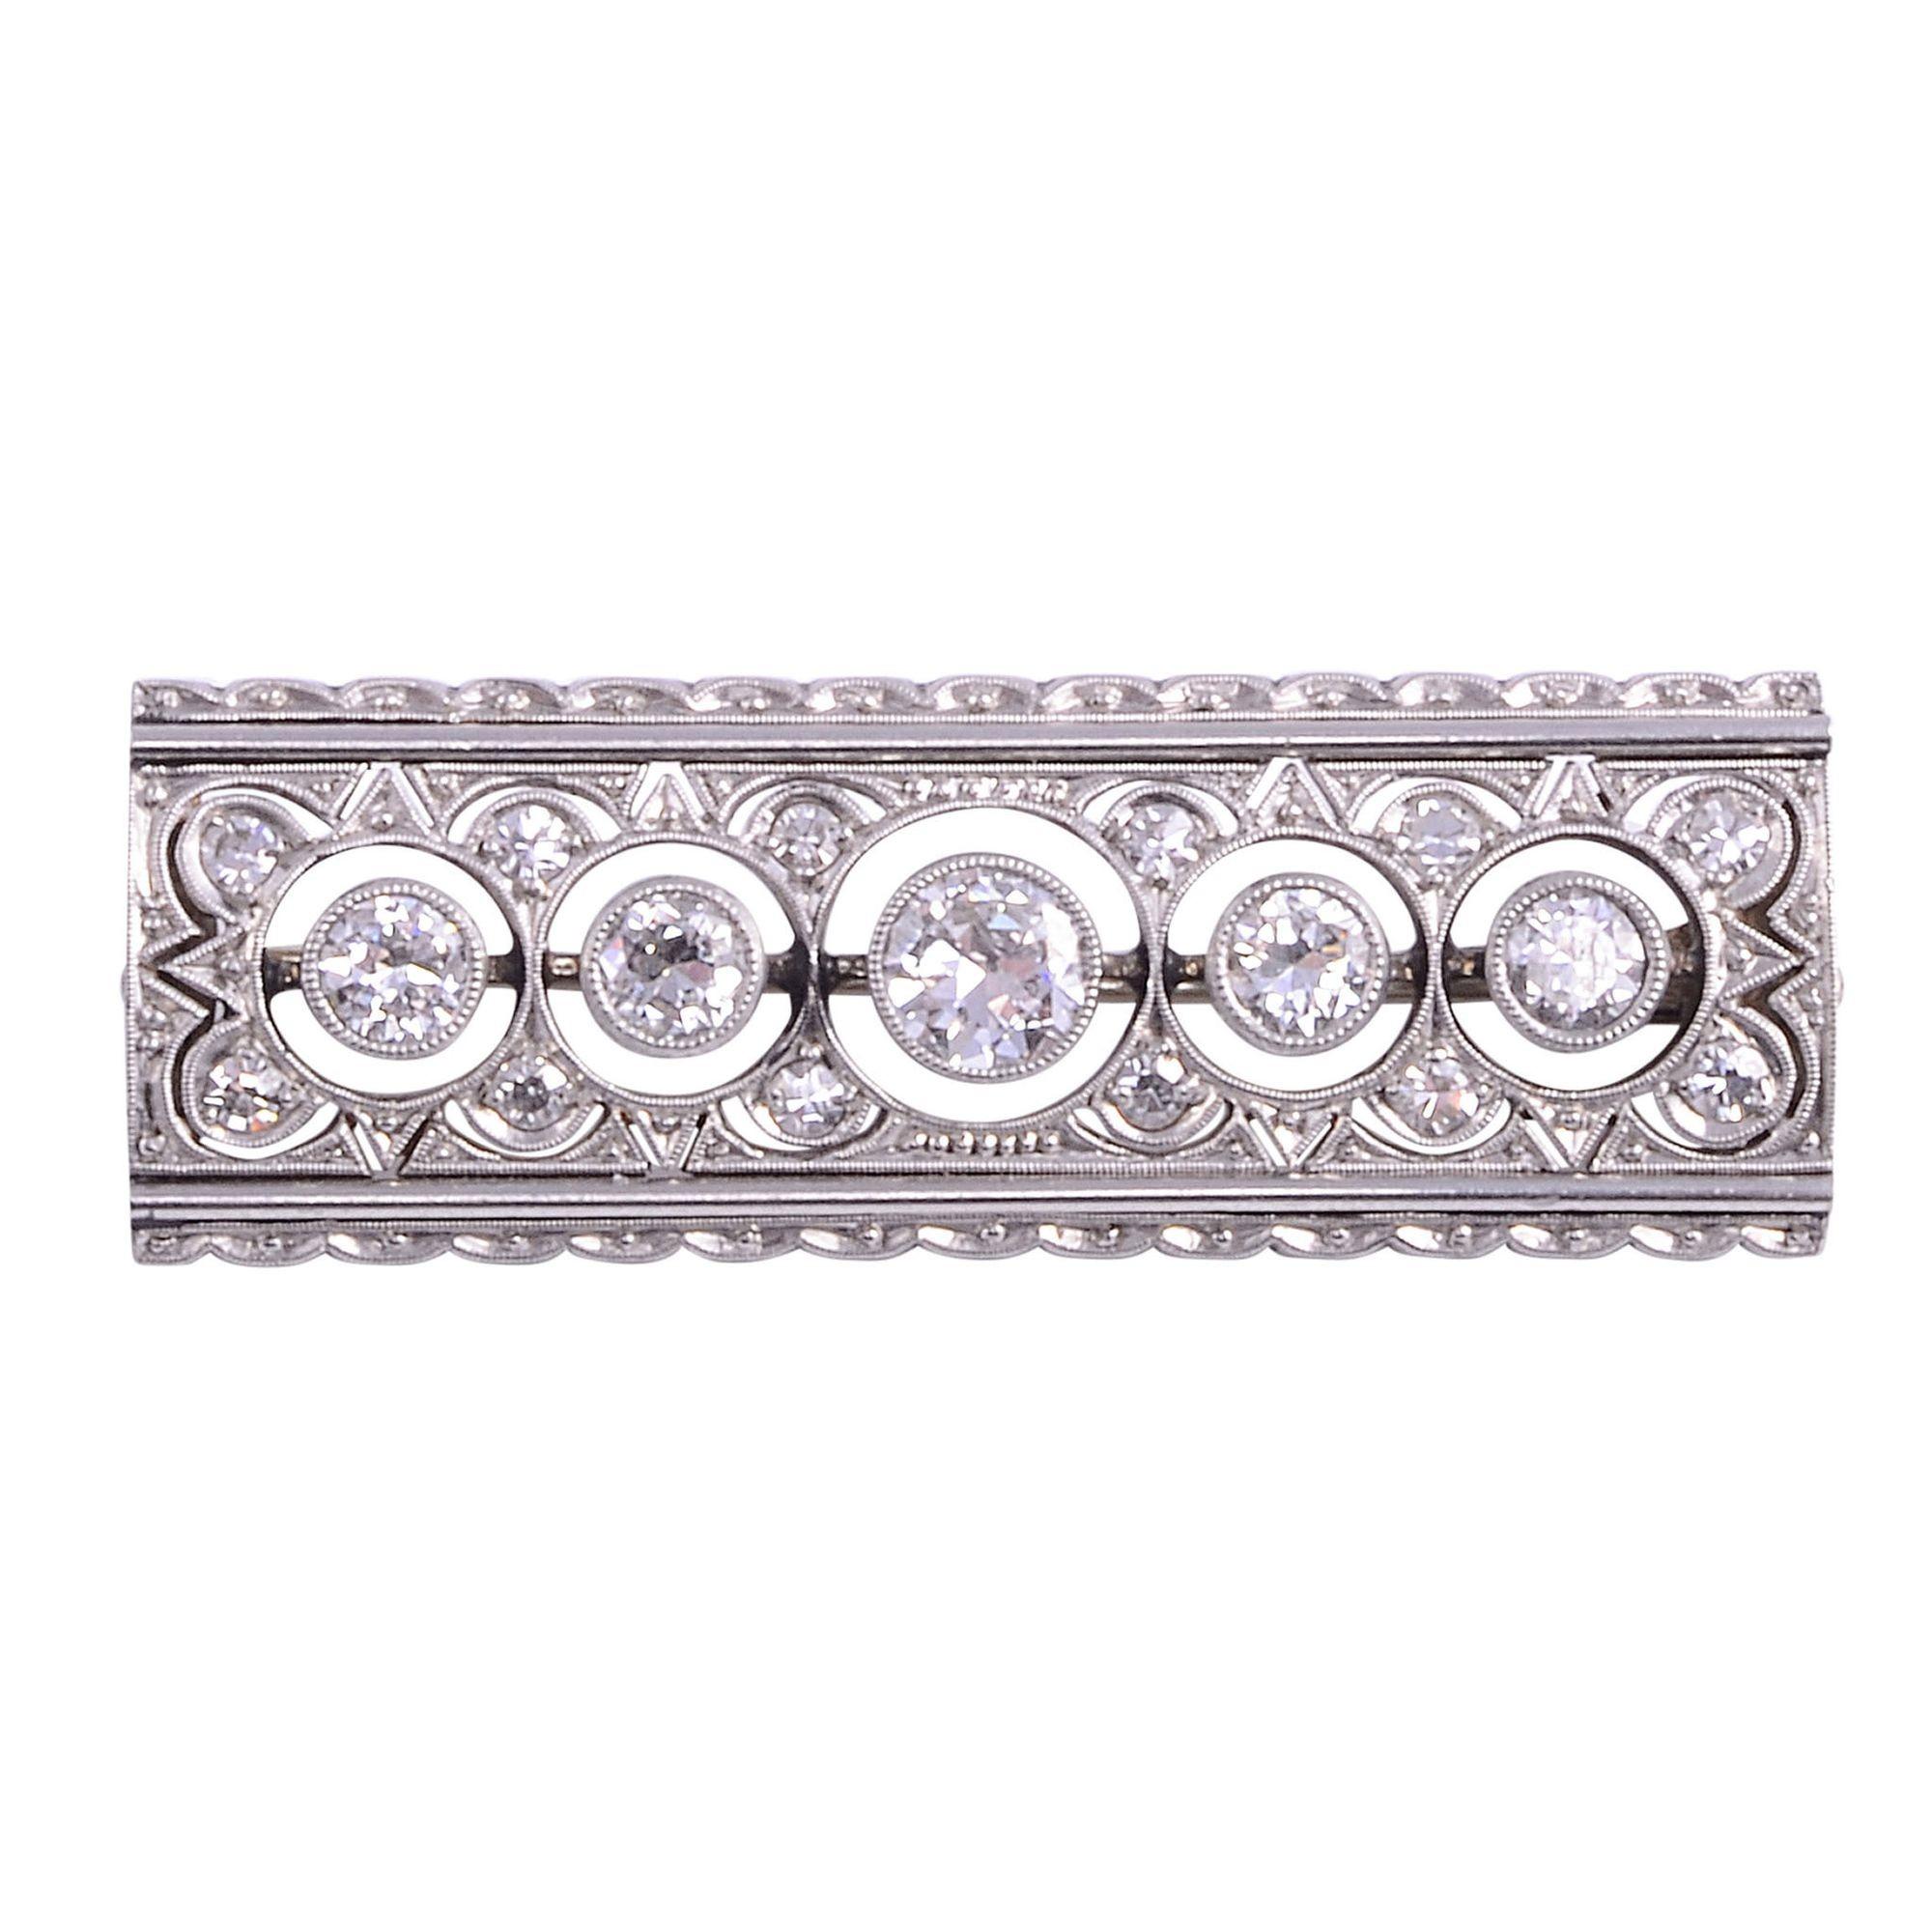 14 Karat White Gold 1.36 CTW Diamond Brooch In Good Condition For Sale In Solvang, CA